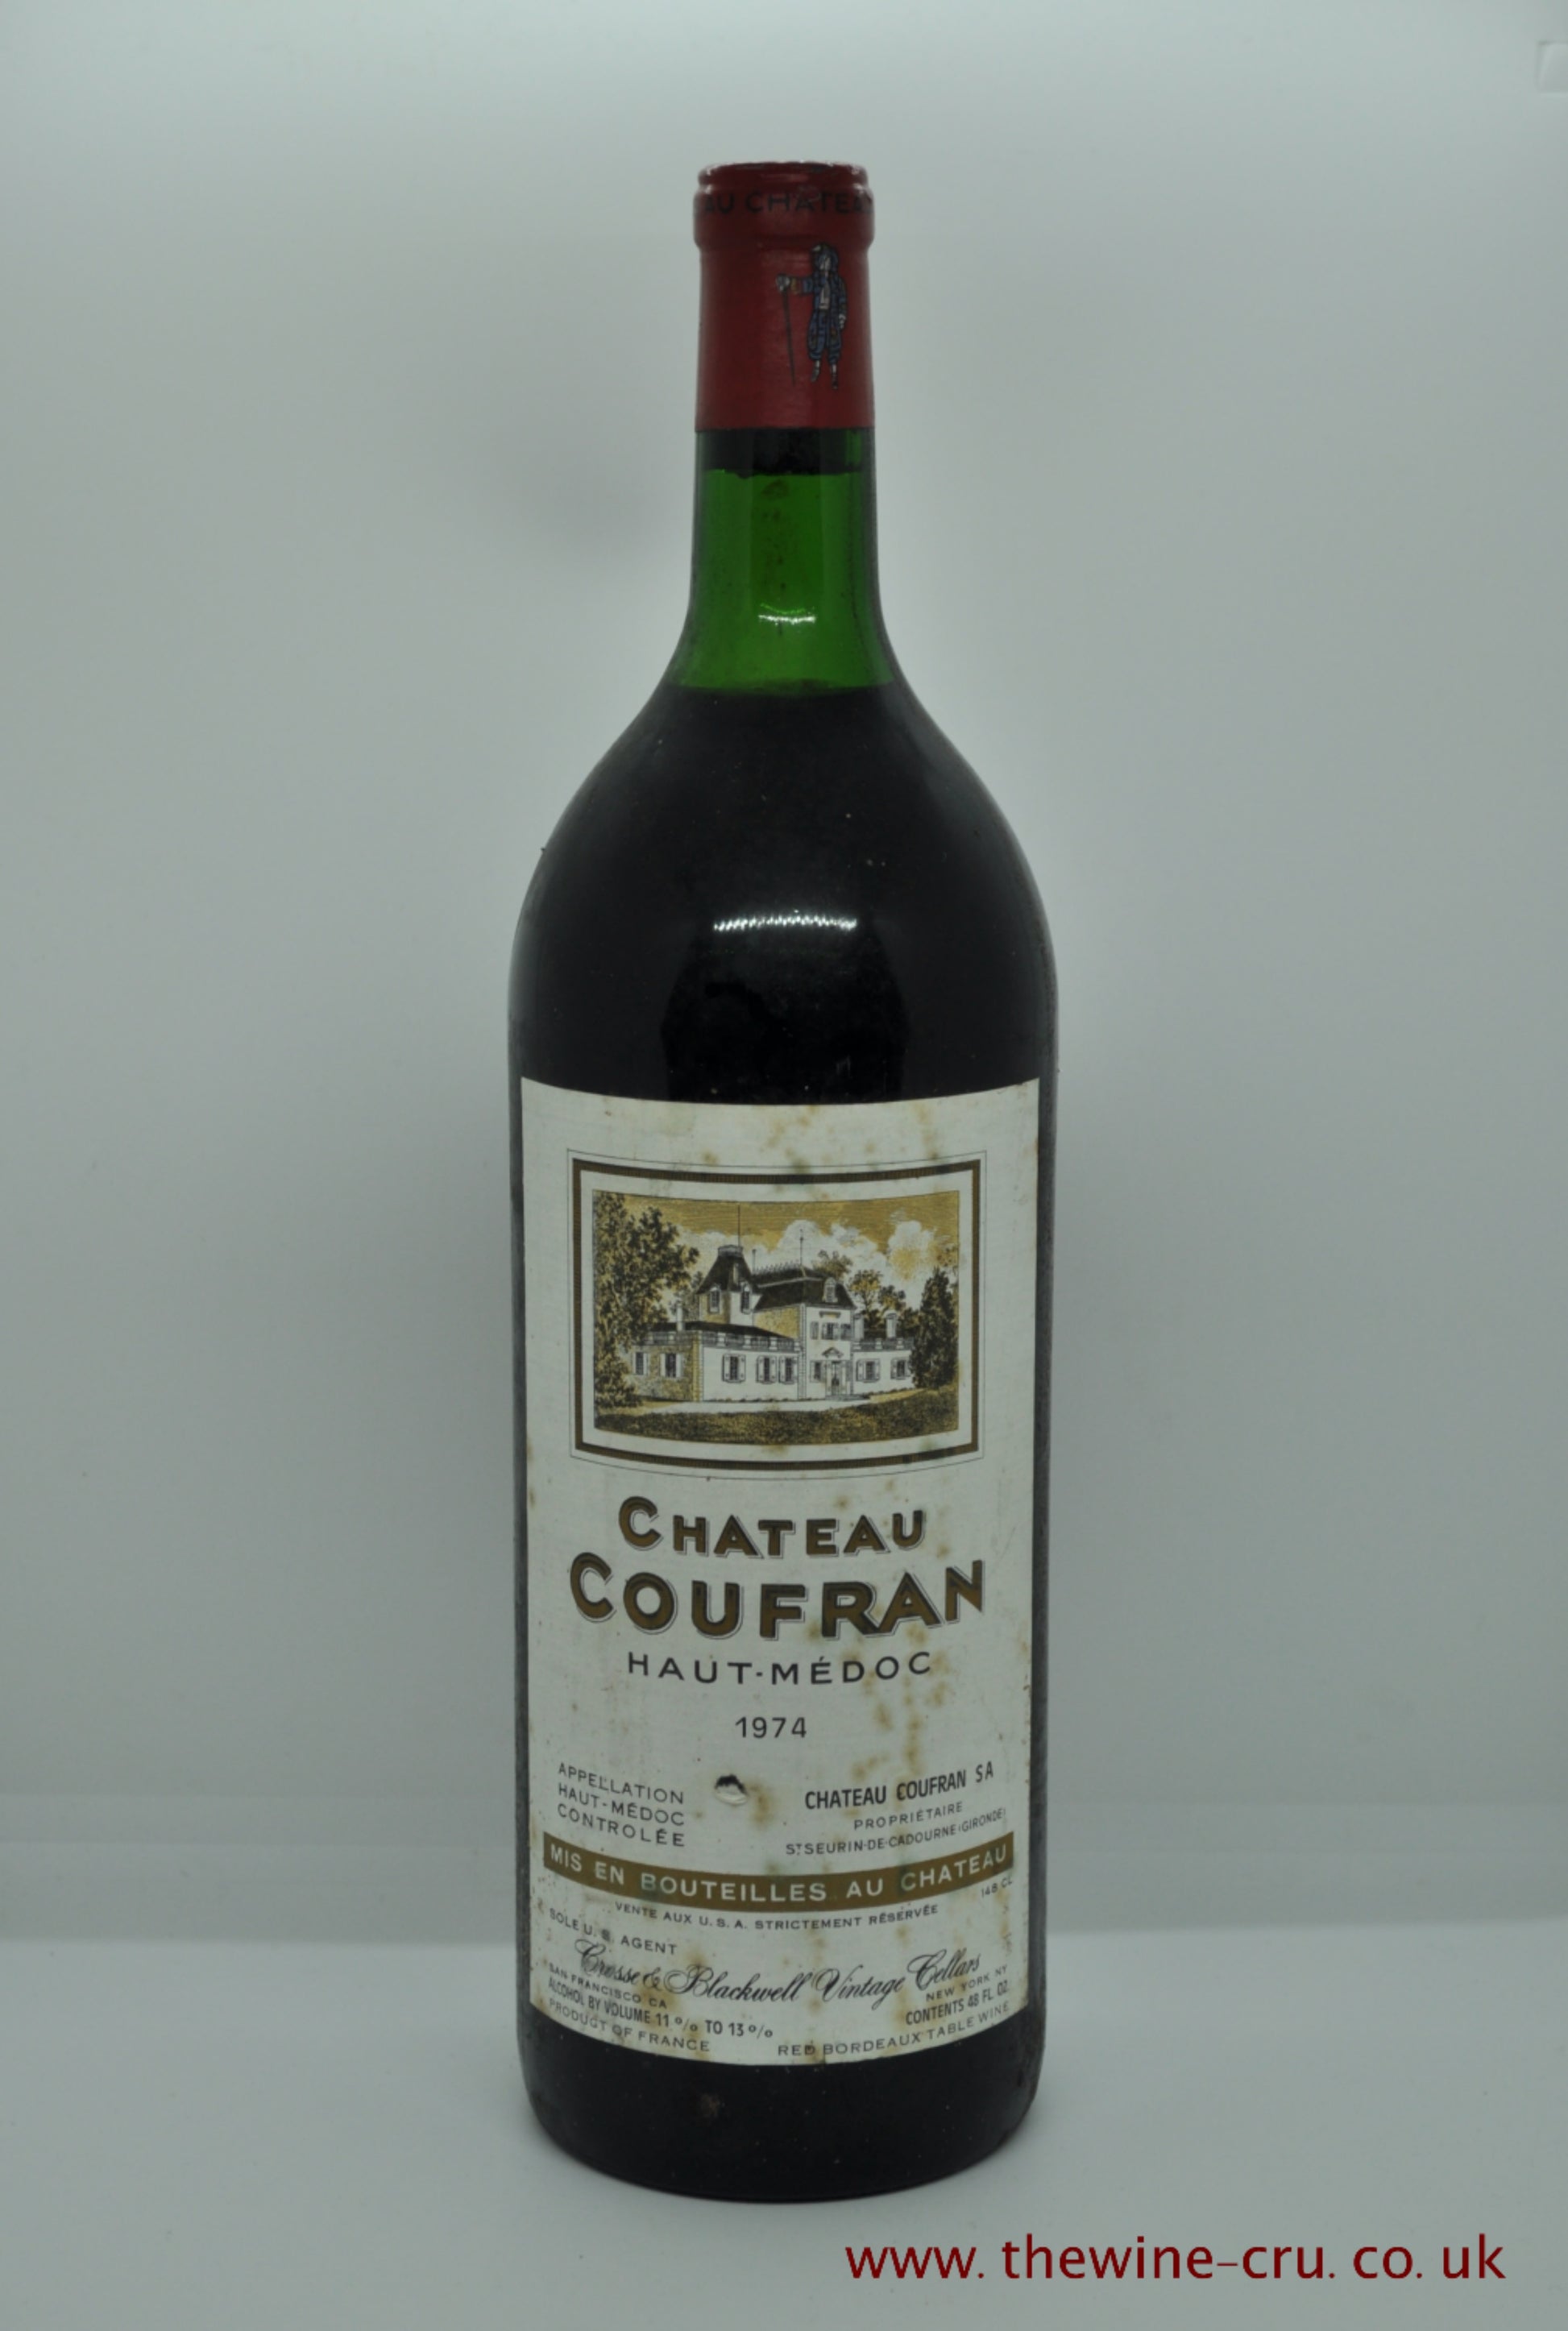 1974 vintage red wine. Chateau Coufran 1974 magnum. France, Bordeaux. Immediate delivery. Free local delivery. Gift wrapping available.